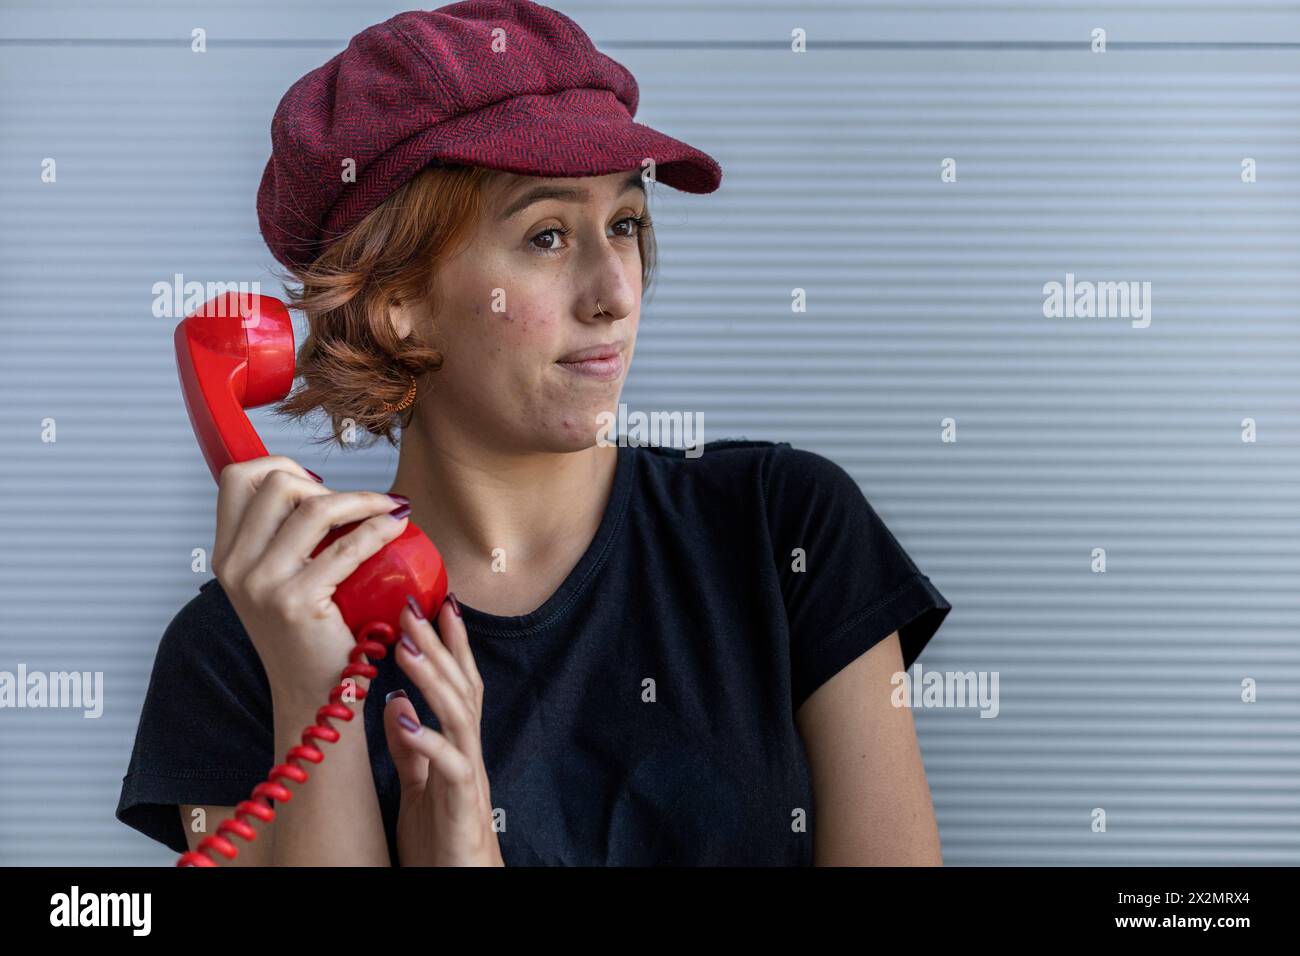 Medium short shot of young Latin American girl (22) with cap and red hair listening to a gossip on her retro red Handset and making a surprised gestur Stock Photo